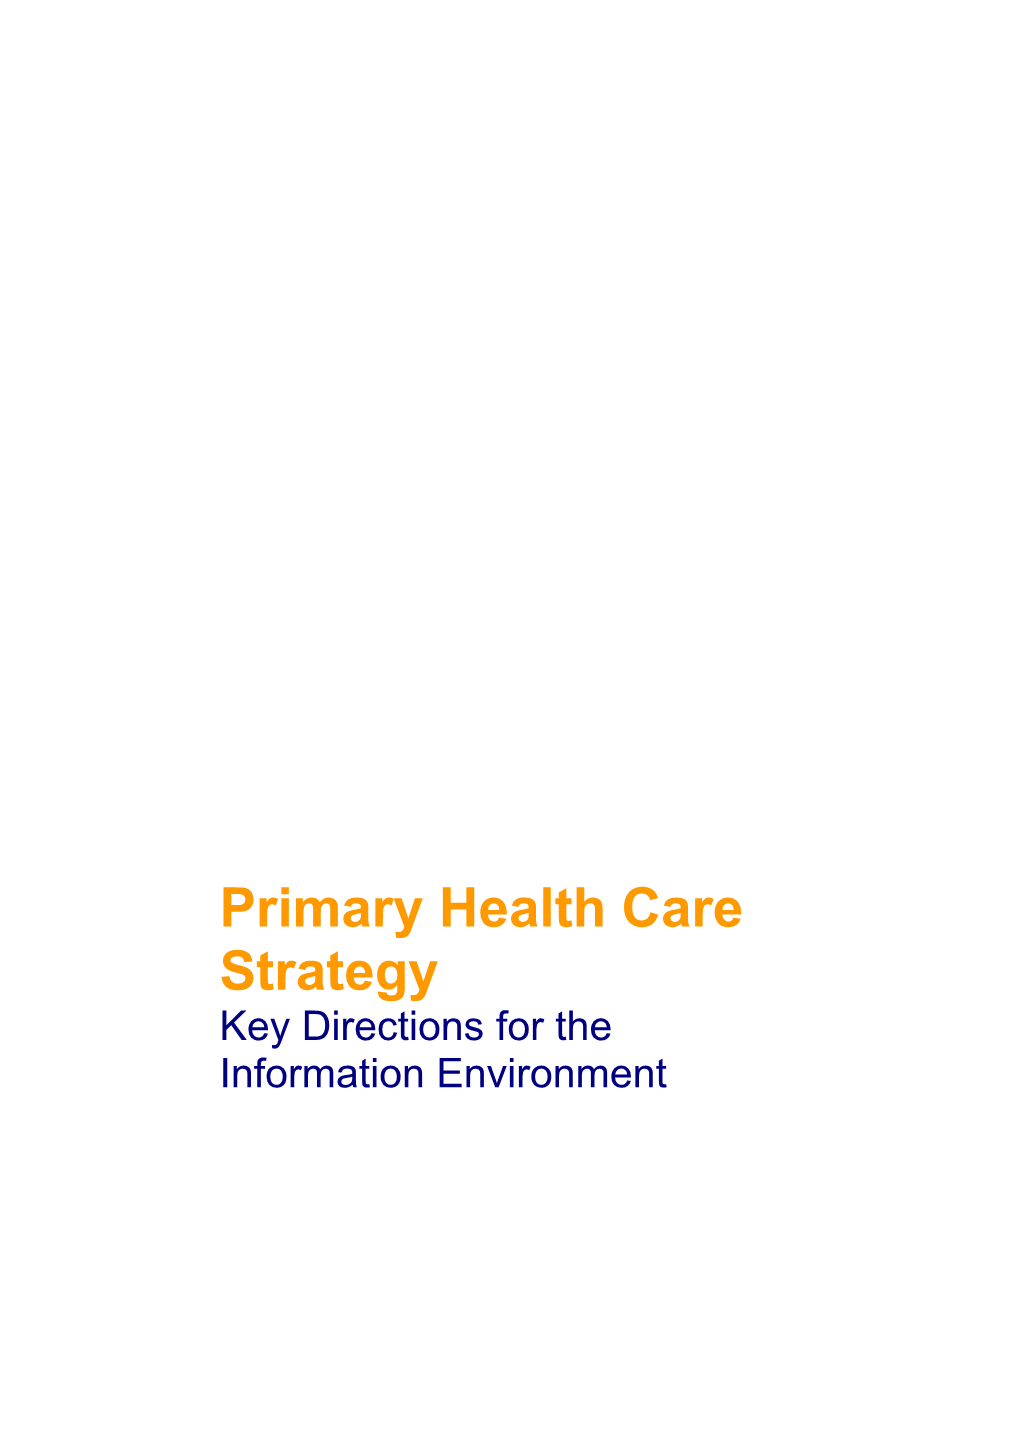 Primary Health Care Strategy: Key Directions for the Information Environment